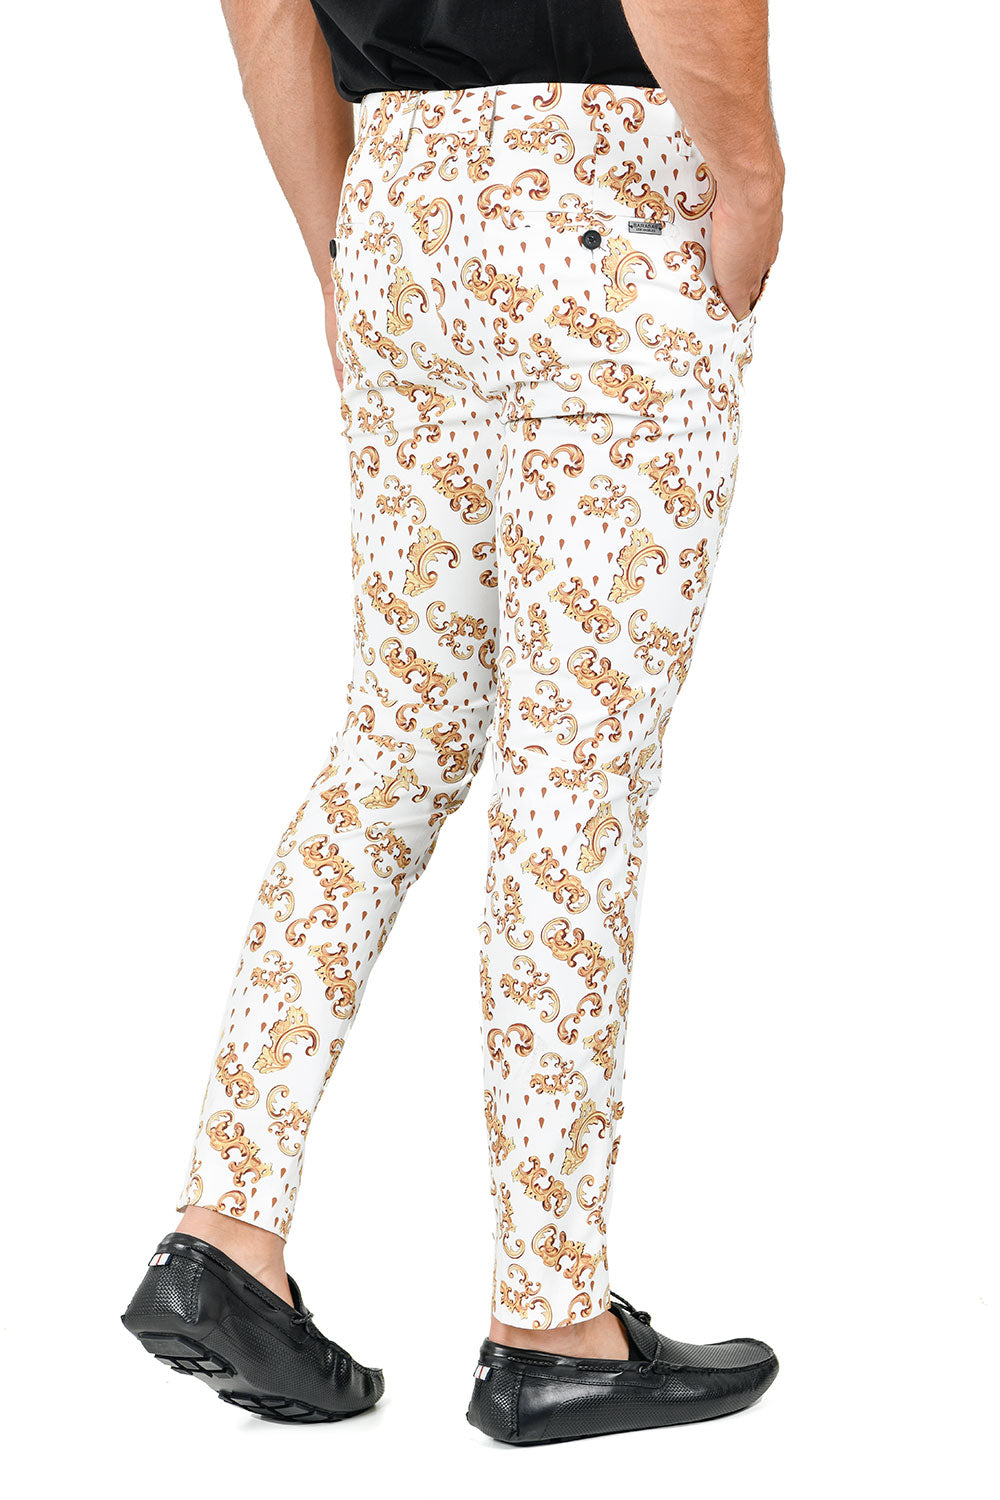 BARABAS Men's Classic Luxury floral Chino Pants CP112 white gold